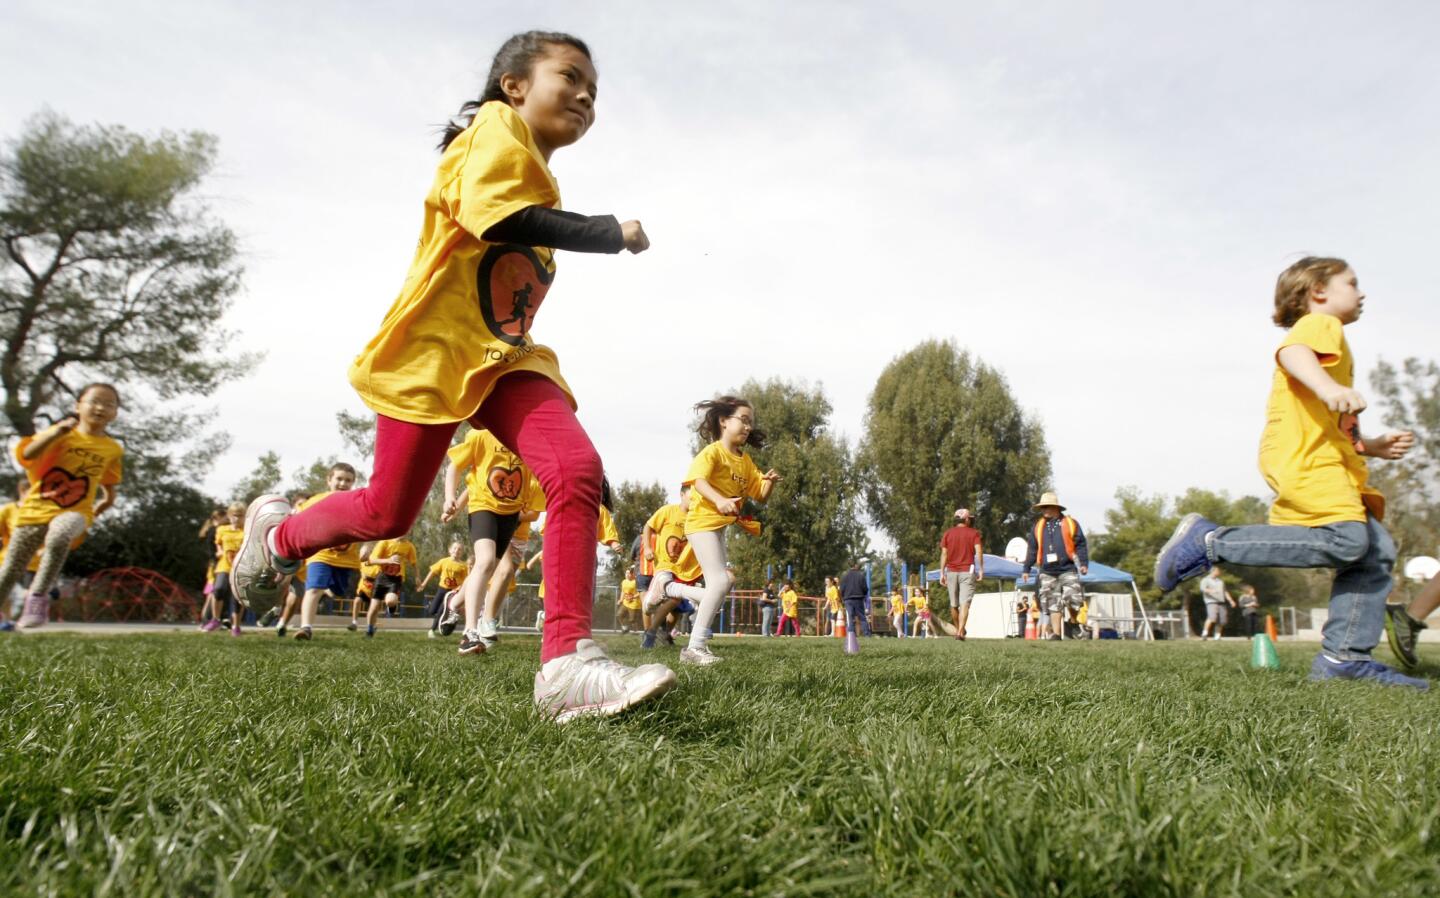 Second grader Julie Rodriguez participates in the annual La Ca–ada Flintridge Educational Foundation Jog-a-thon at Palm Crest Elementary School in La Ca–ada Flintridge on Wednesday, Nov. 16, 2016. Funds raised go to the Annual Fund, which helps fund drama, art and music classes along with class size reduction and counselor, among other things.